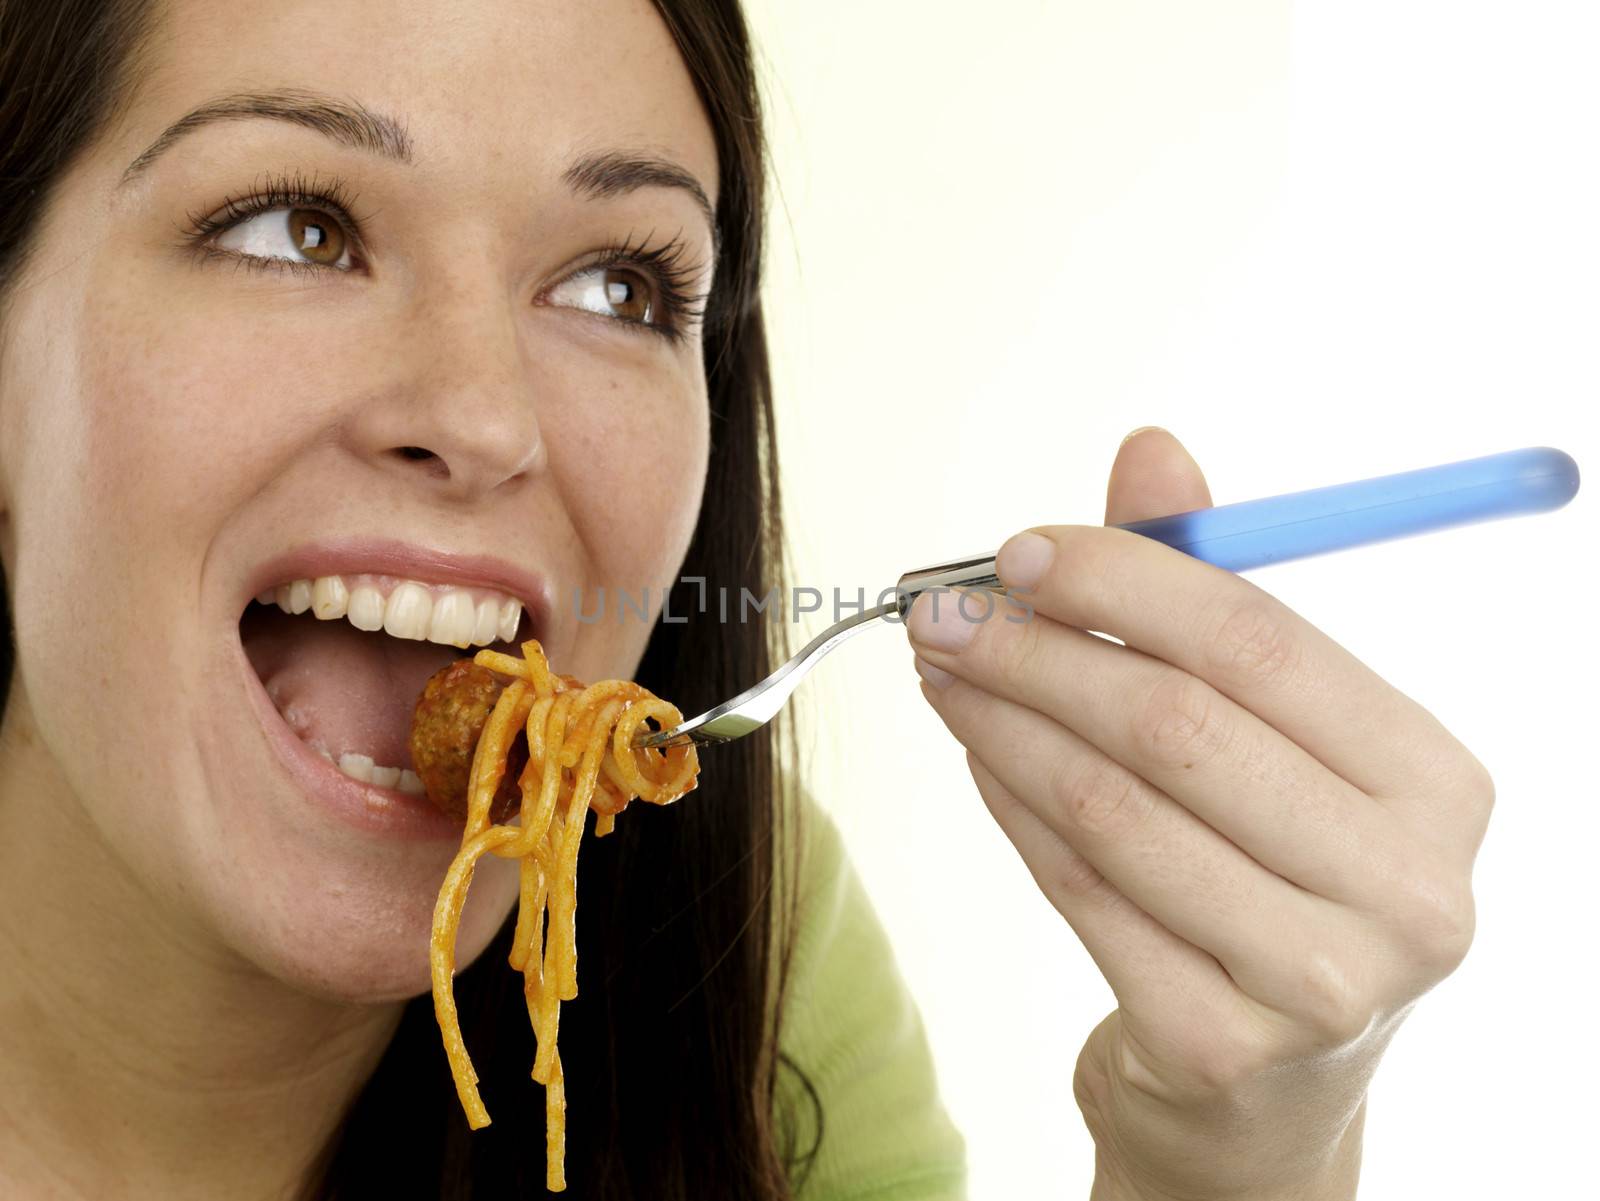 Young Woman Eating Spaghetti and Meatballs. Model Released